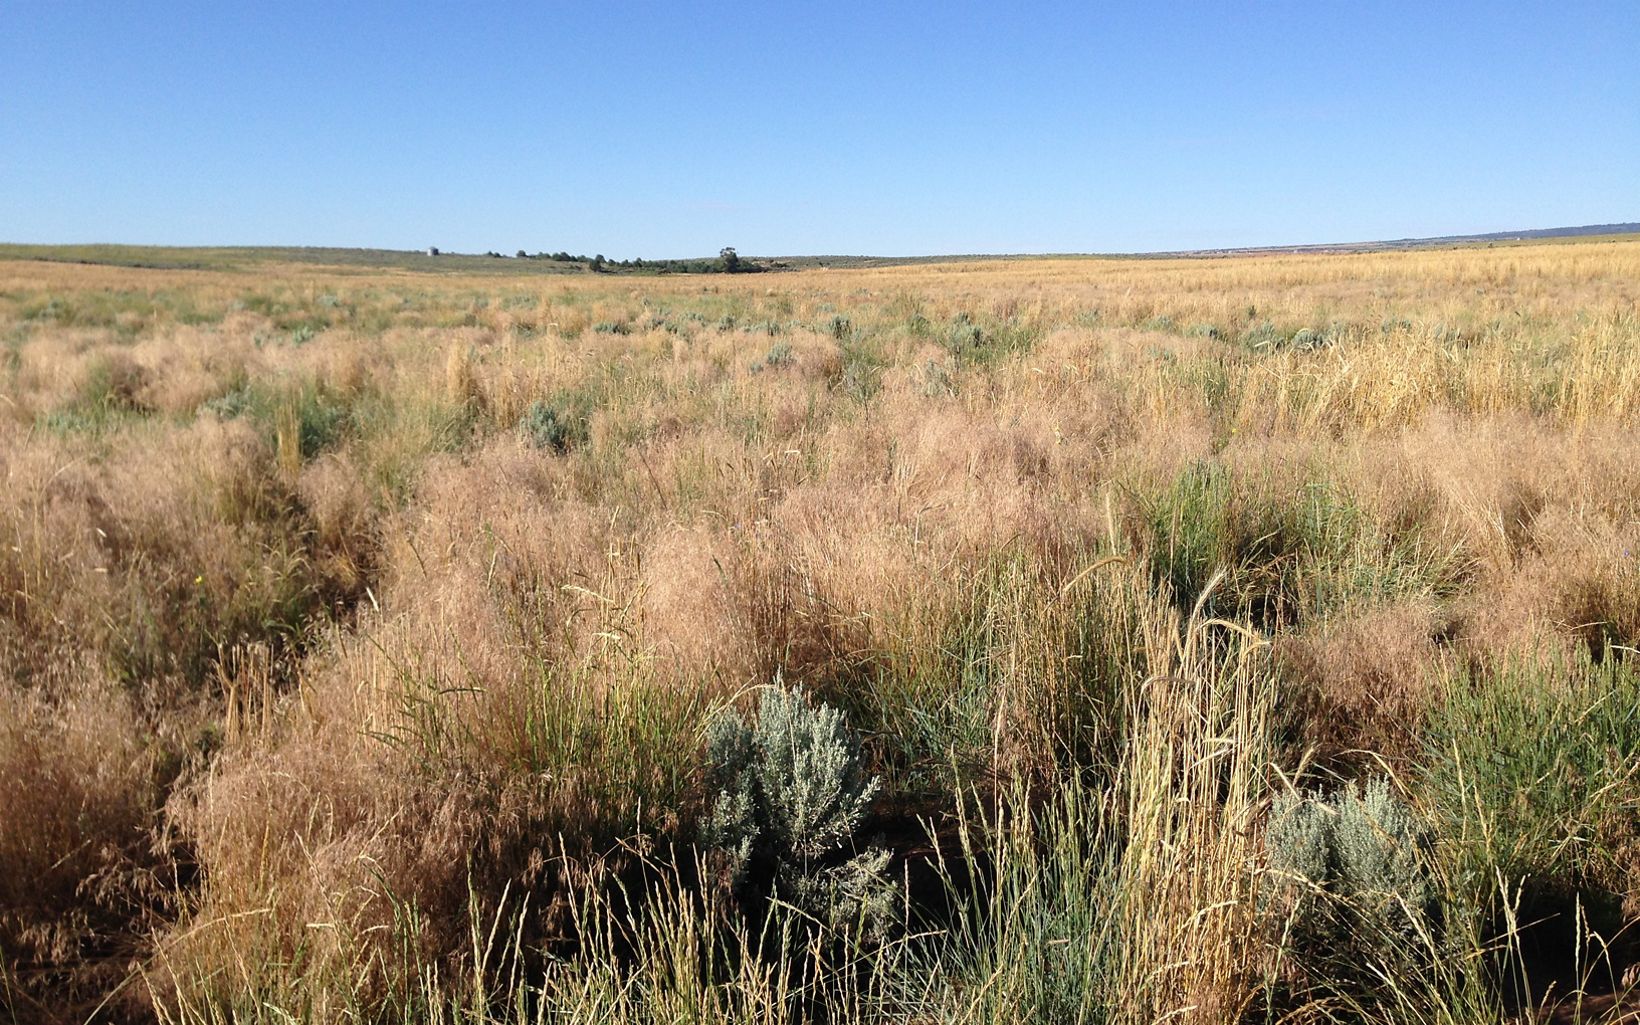 The preserve is situated within the core of Utah’s remaining sagebrush shrublands. 